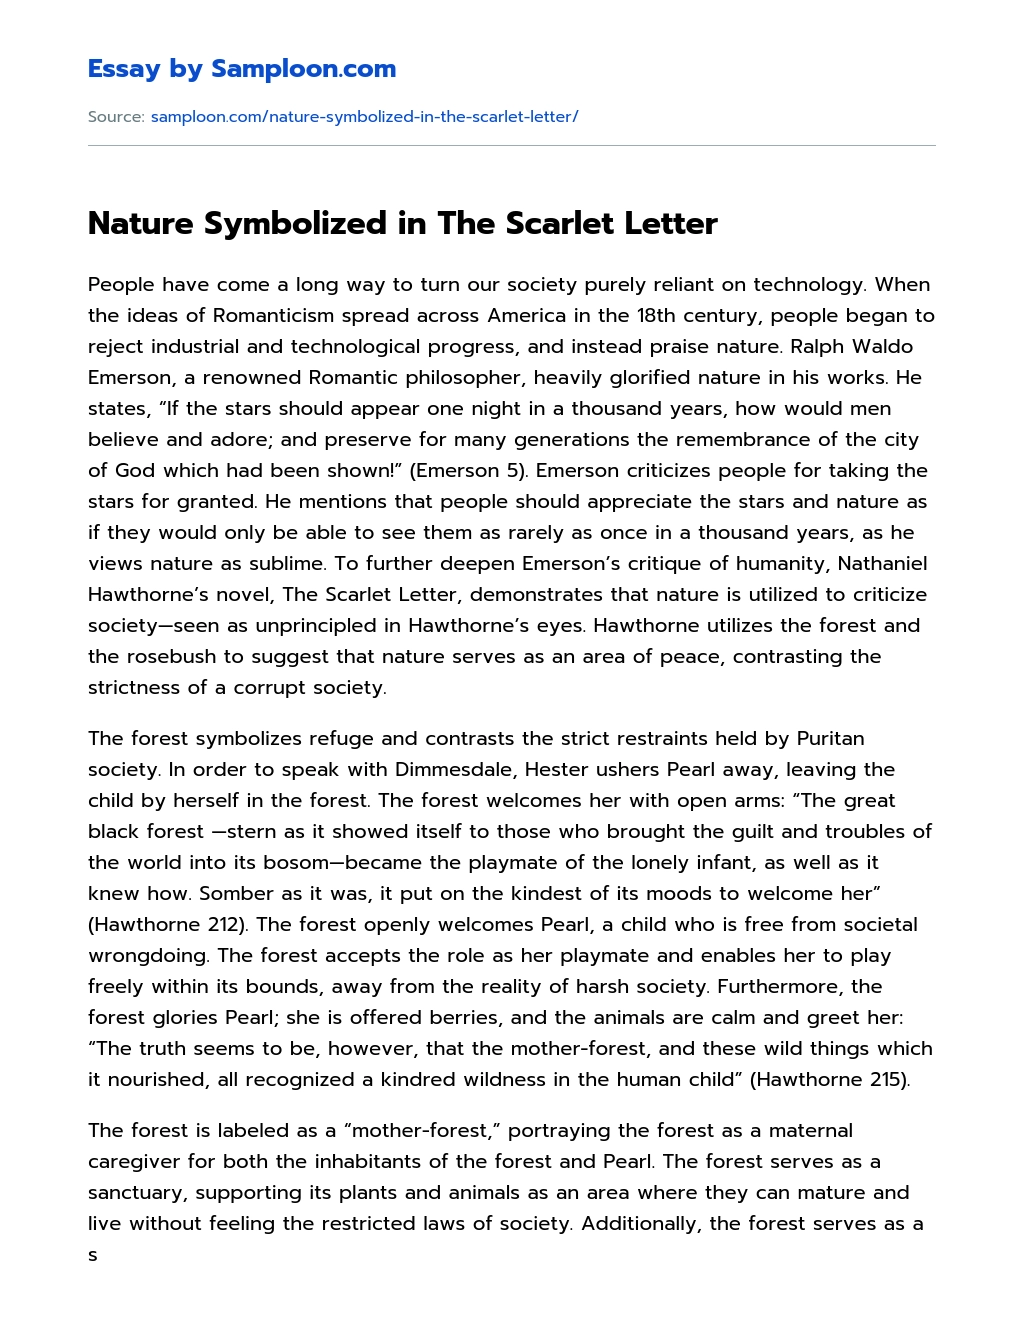 Nature Symbolized in The Scarlet Letter Summary essay